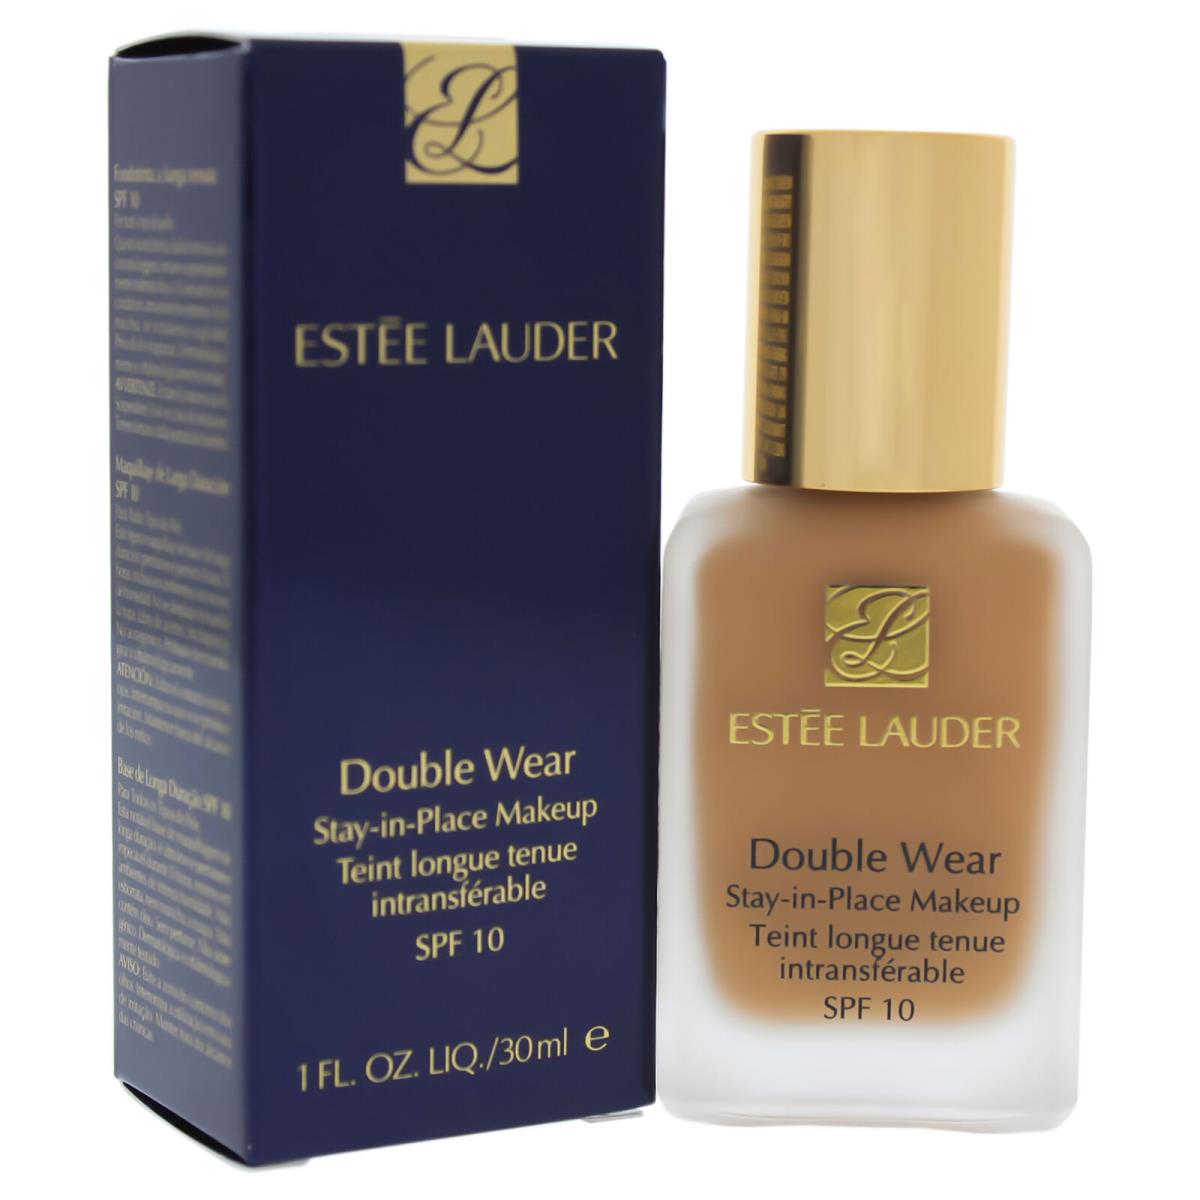 Estee Lauder Double Wear Stay-in-place Makeup Spf 10 - 4N2 Spiced Sand - All